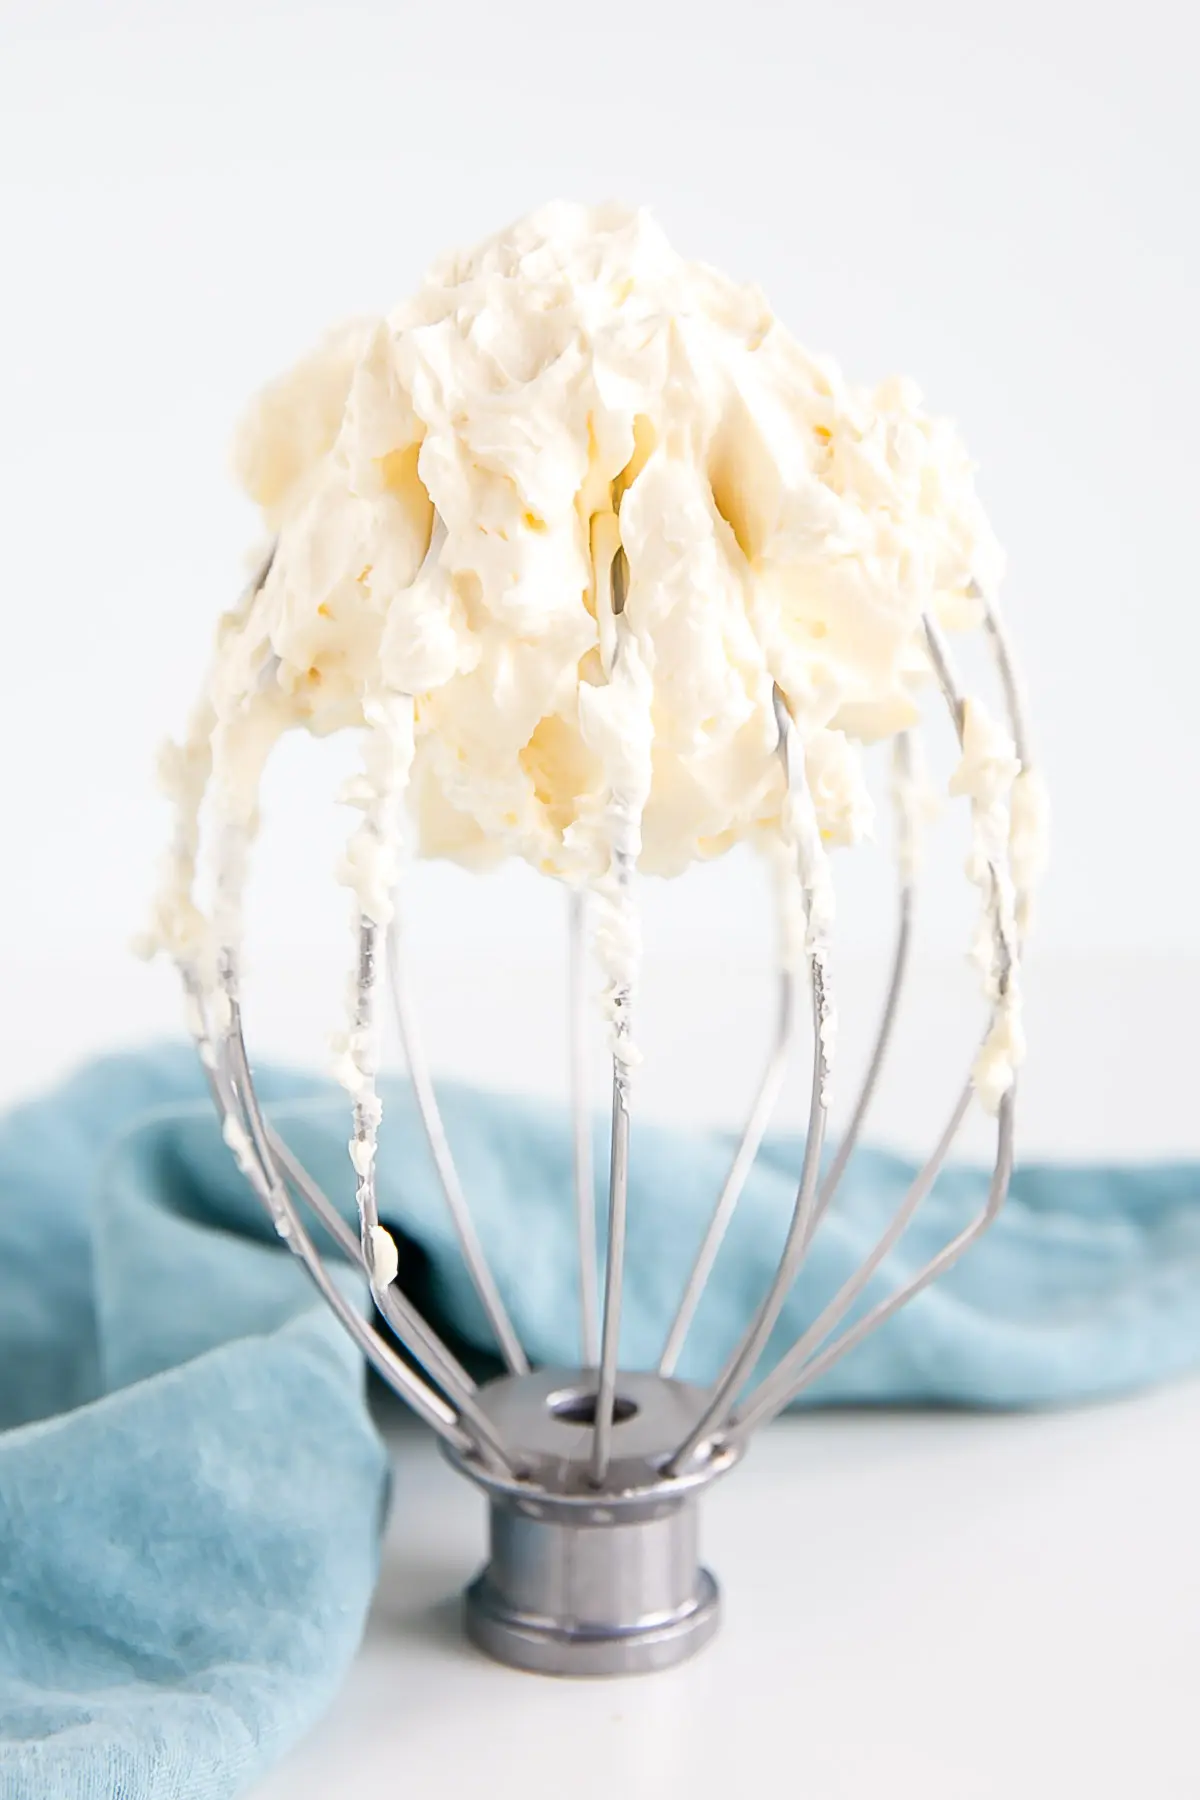 German buttercream on a whisk attachment.